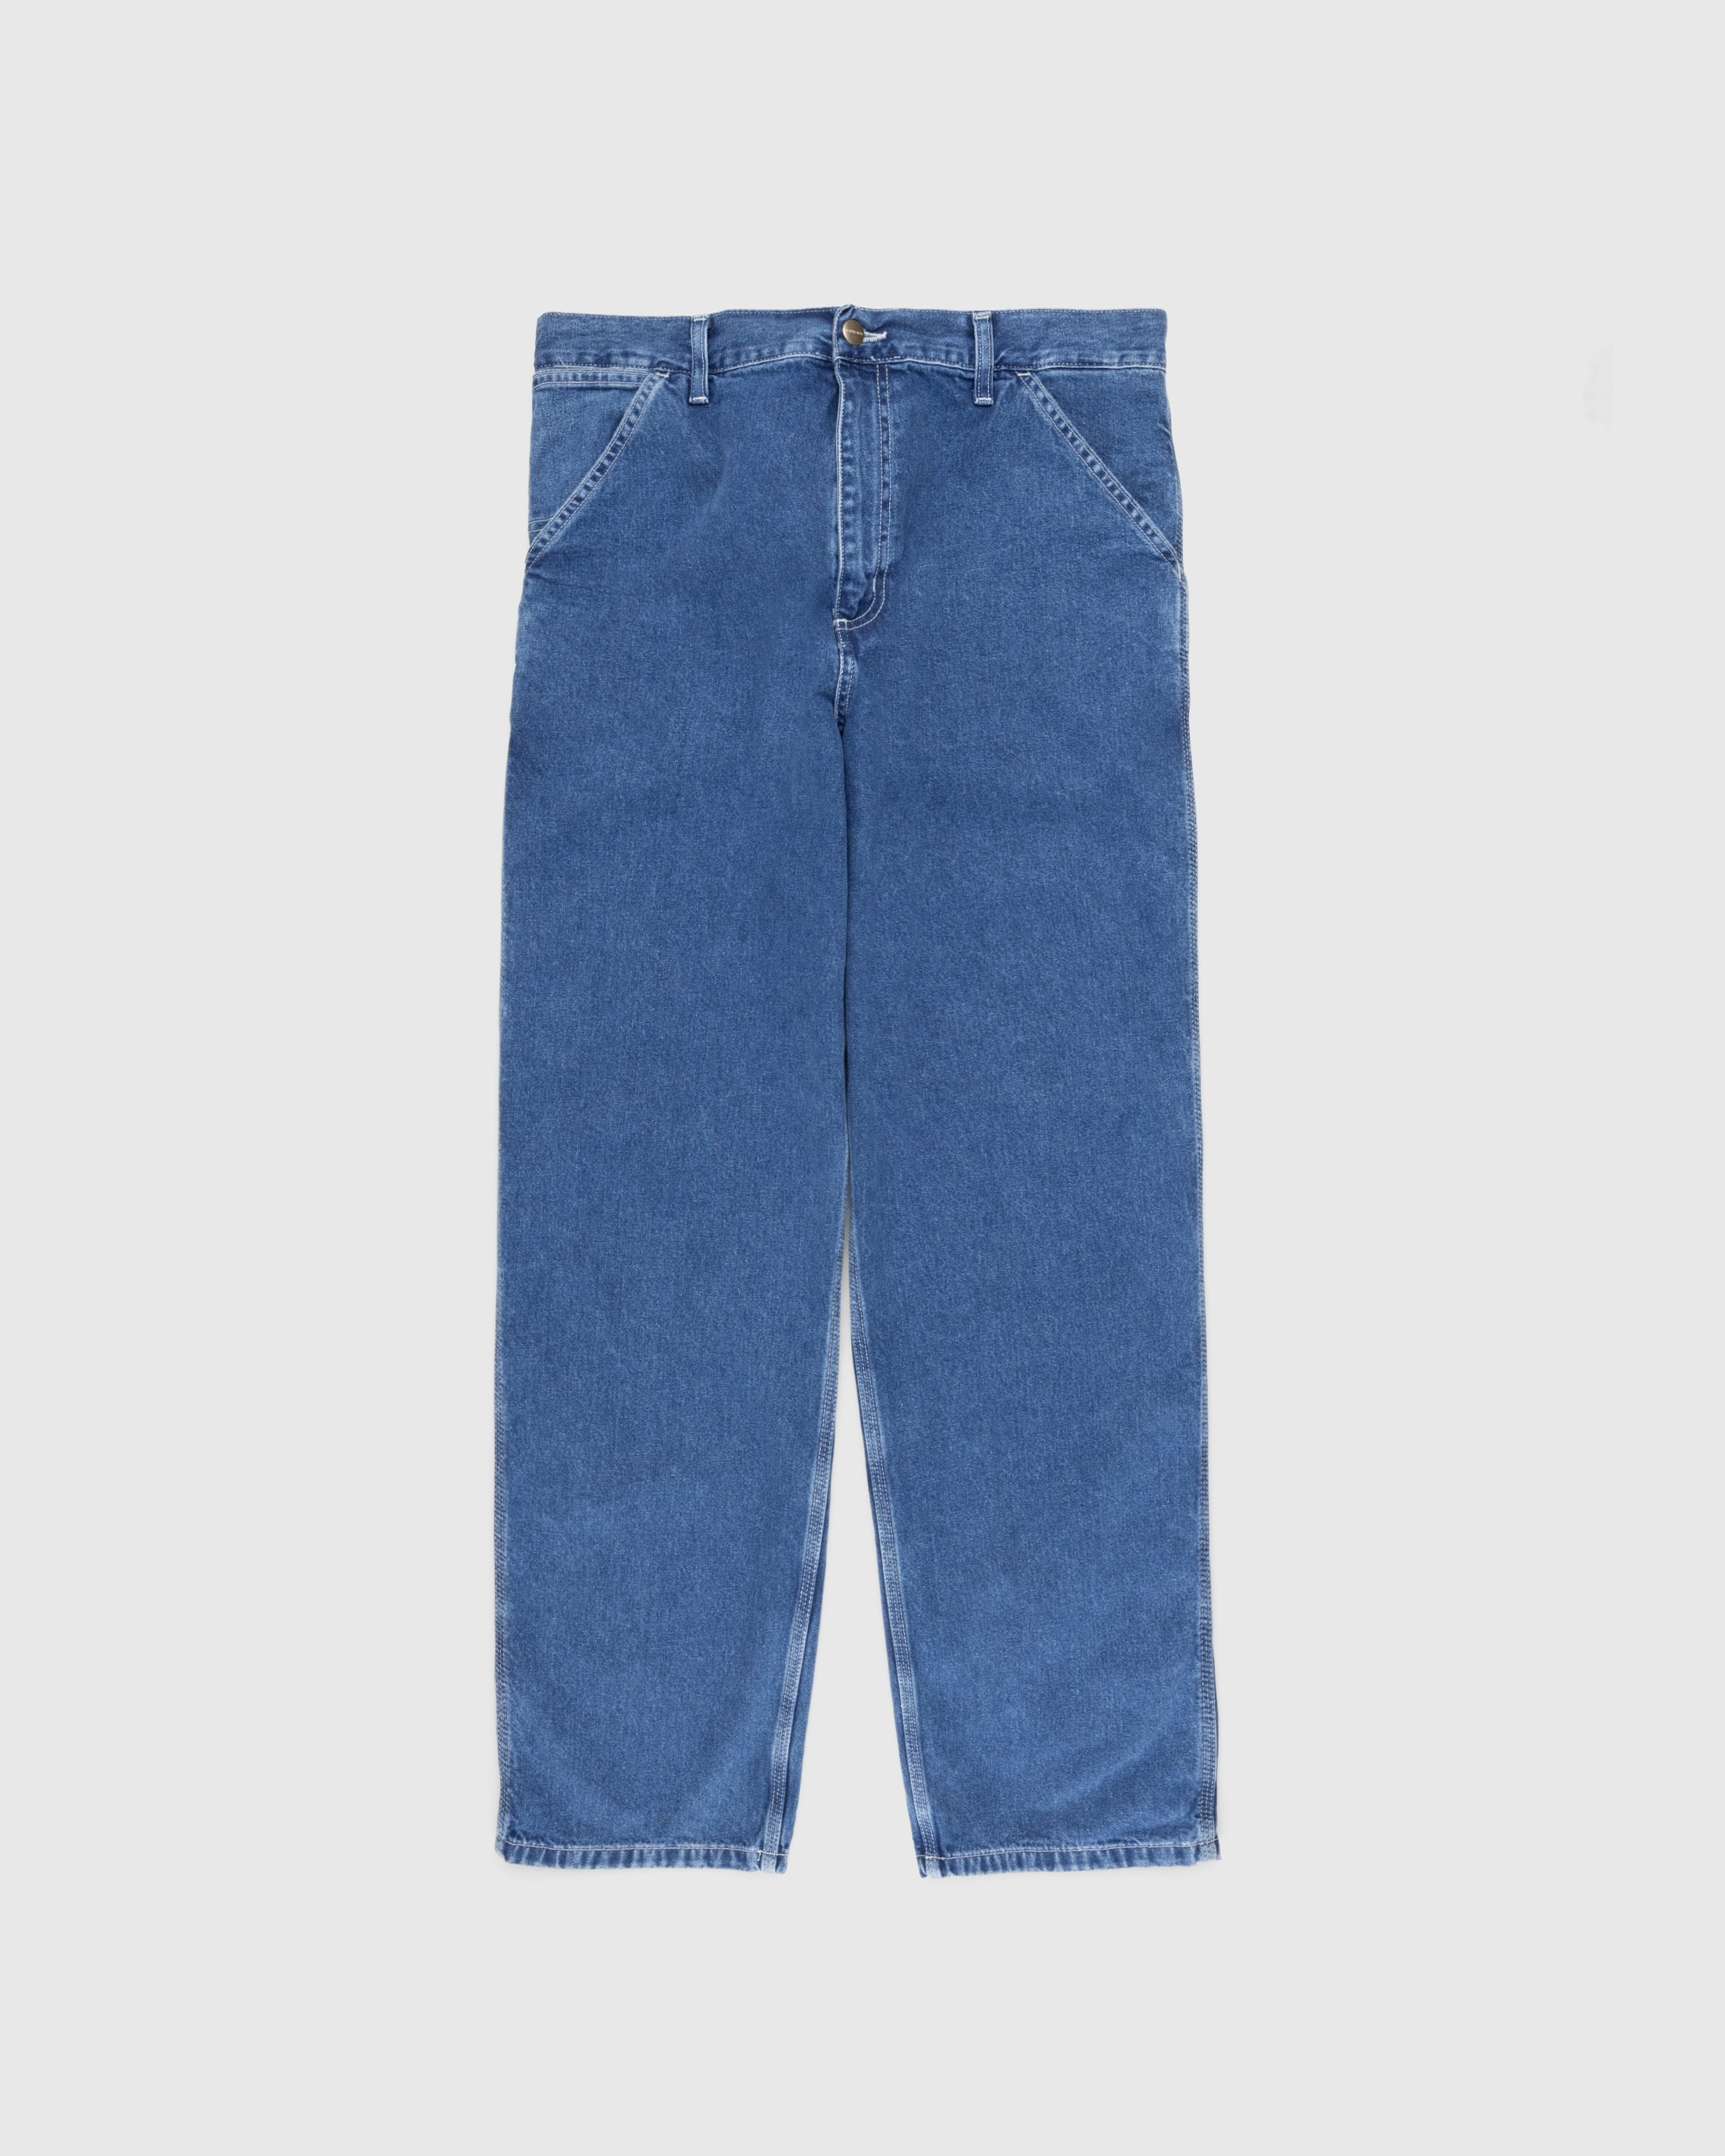 Carhartt WIP – Simple Pant Blue/Stone-Washed